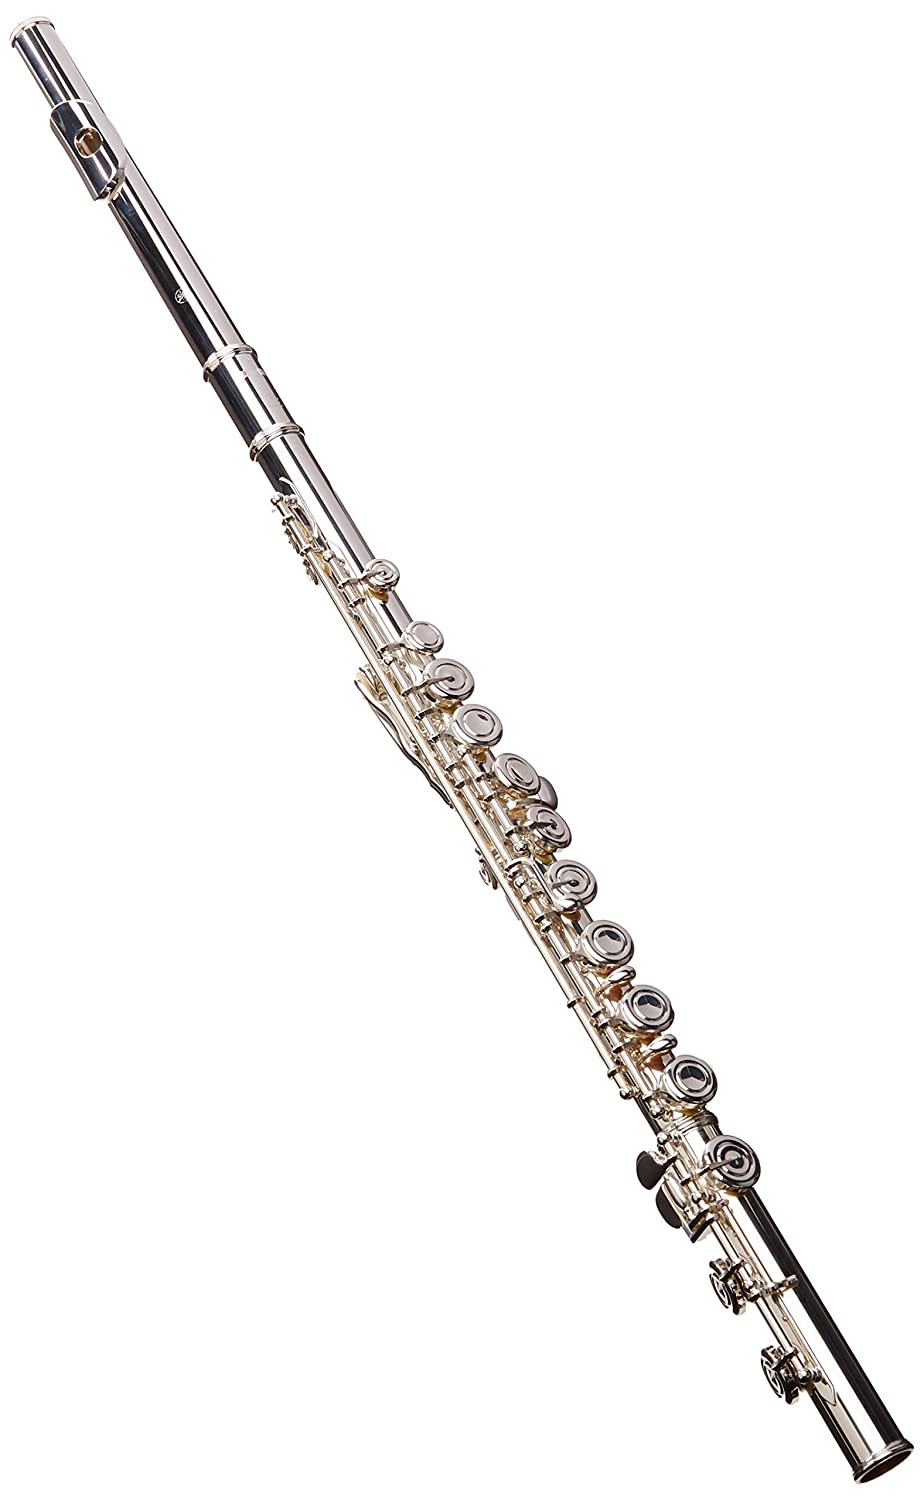 7 Best Kids Flutes 2022 - Buying Guide & Reviews 1